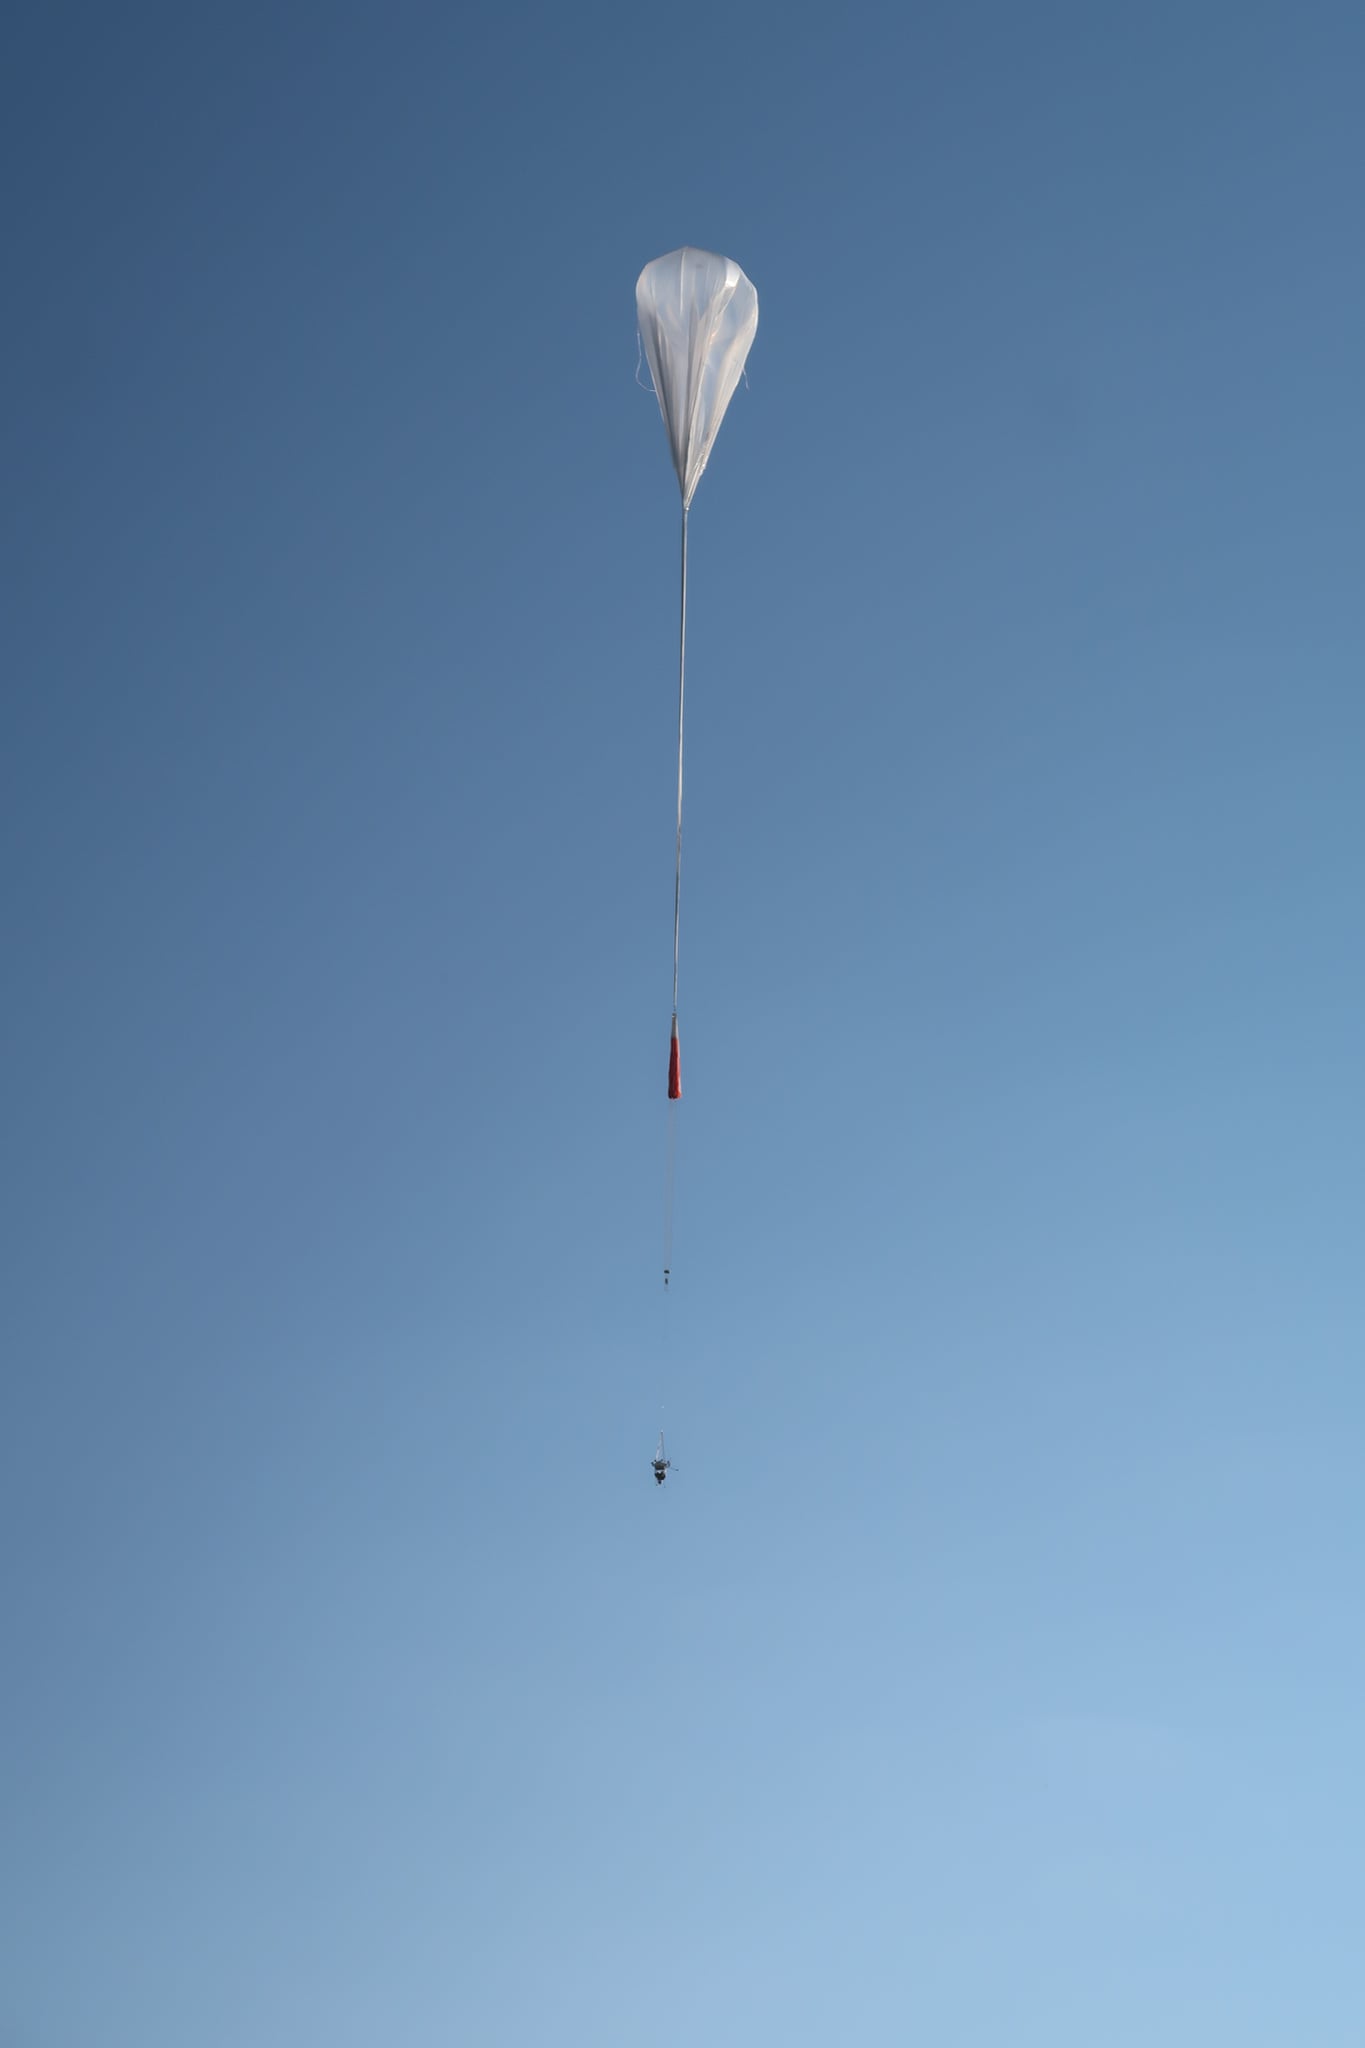 Initial ascent of the balloon